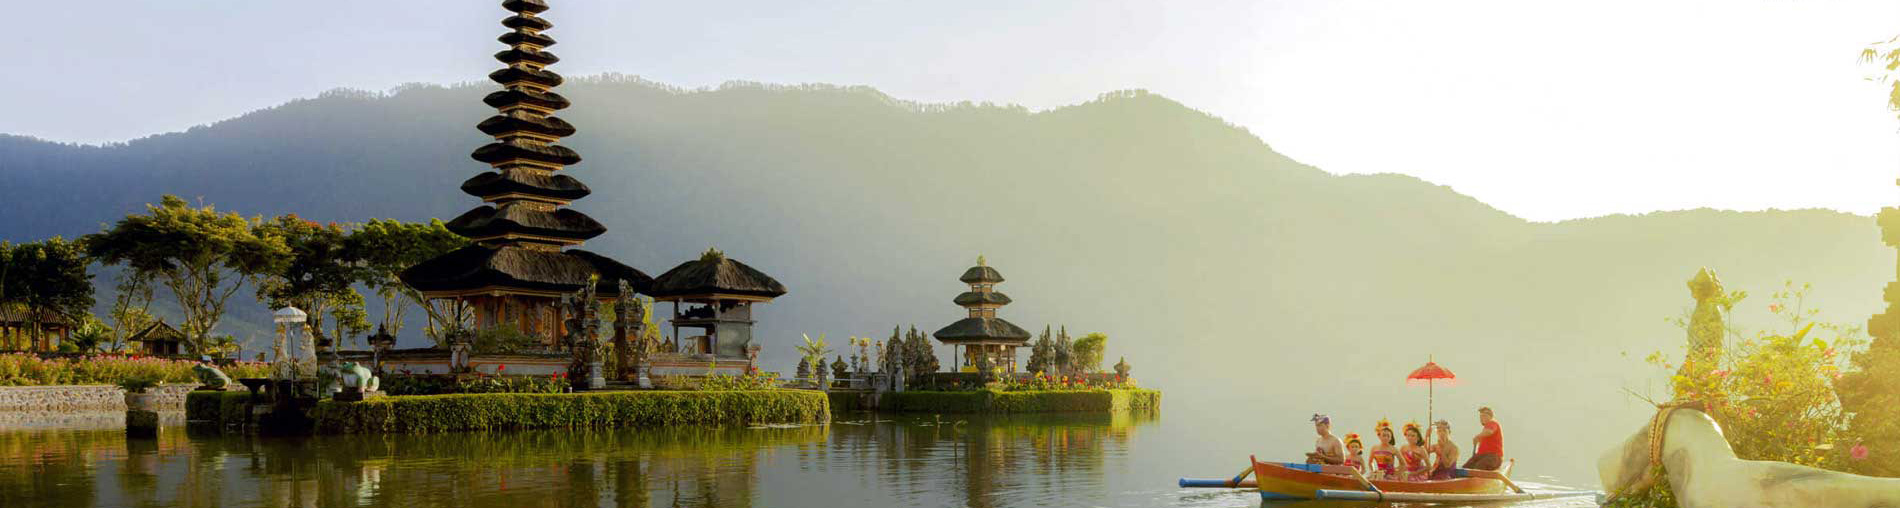 Indonesia Holiday Tour Packages From India